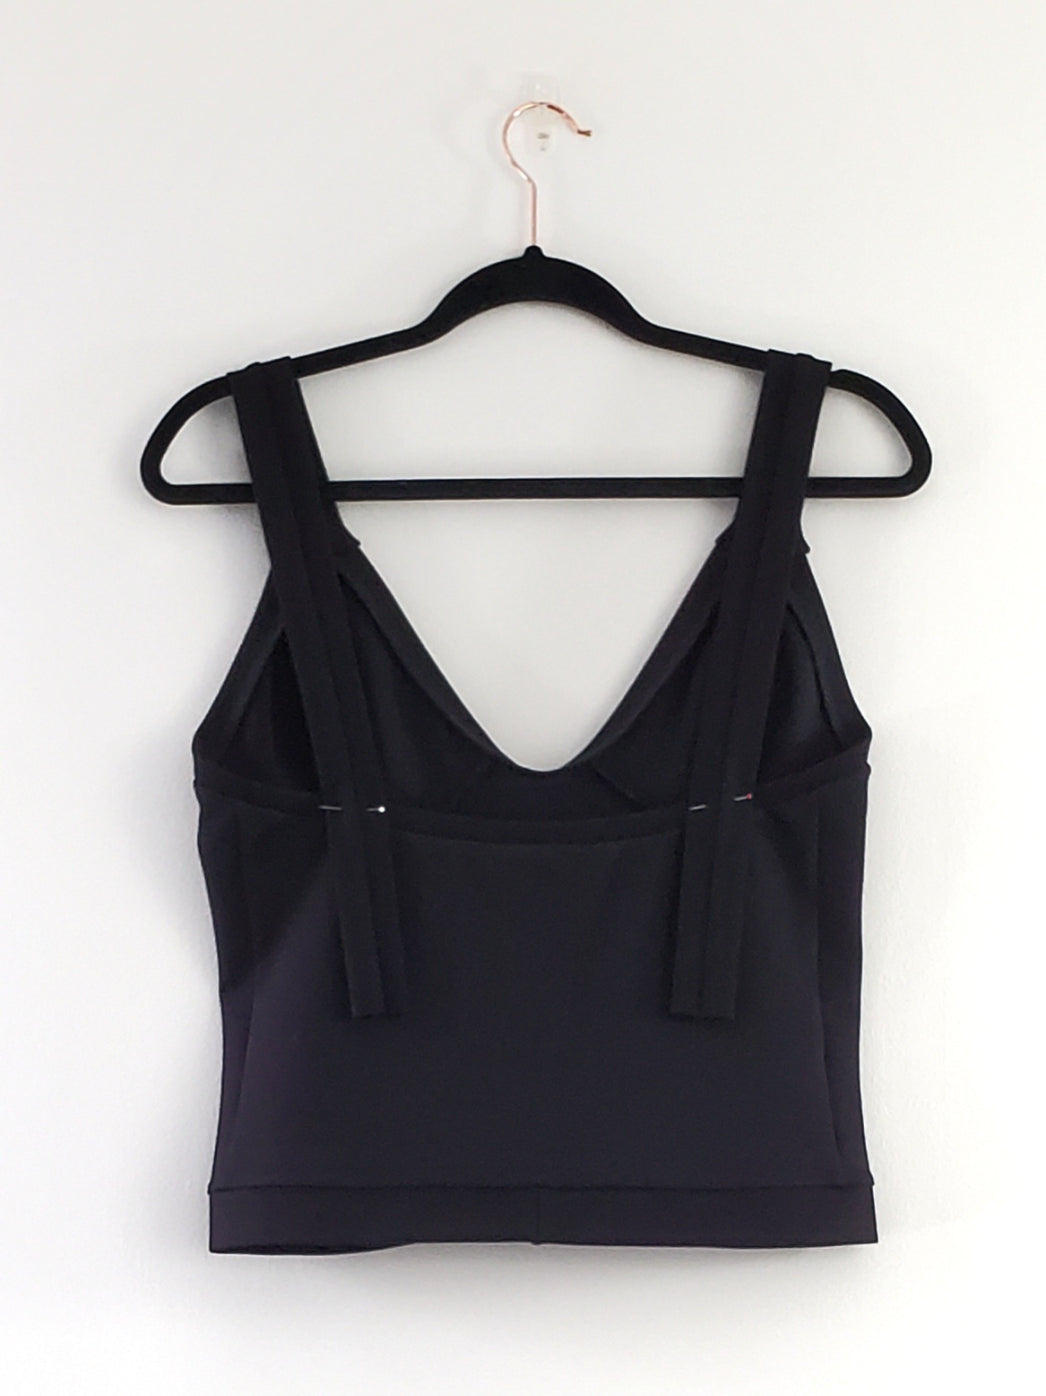 CM Black Ponte Tank with Seamed Bust (M/L up to C cup) - 1of1